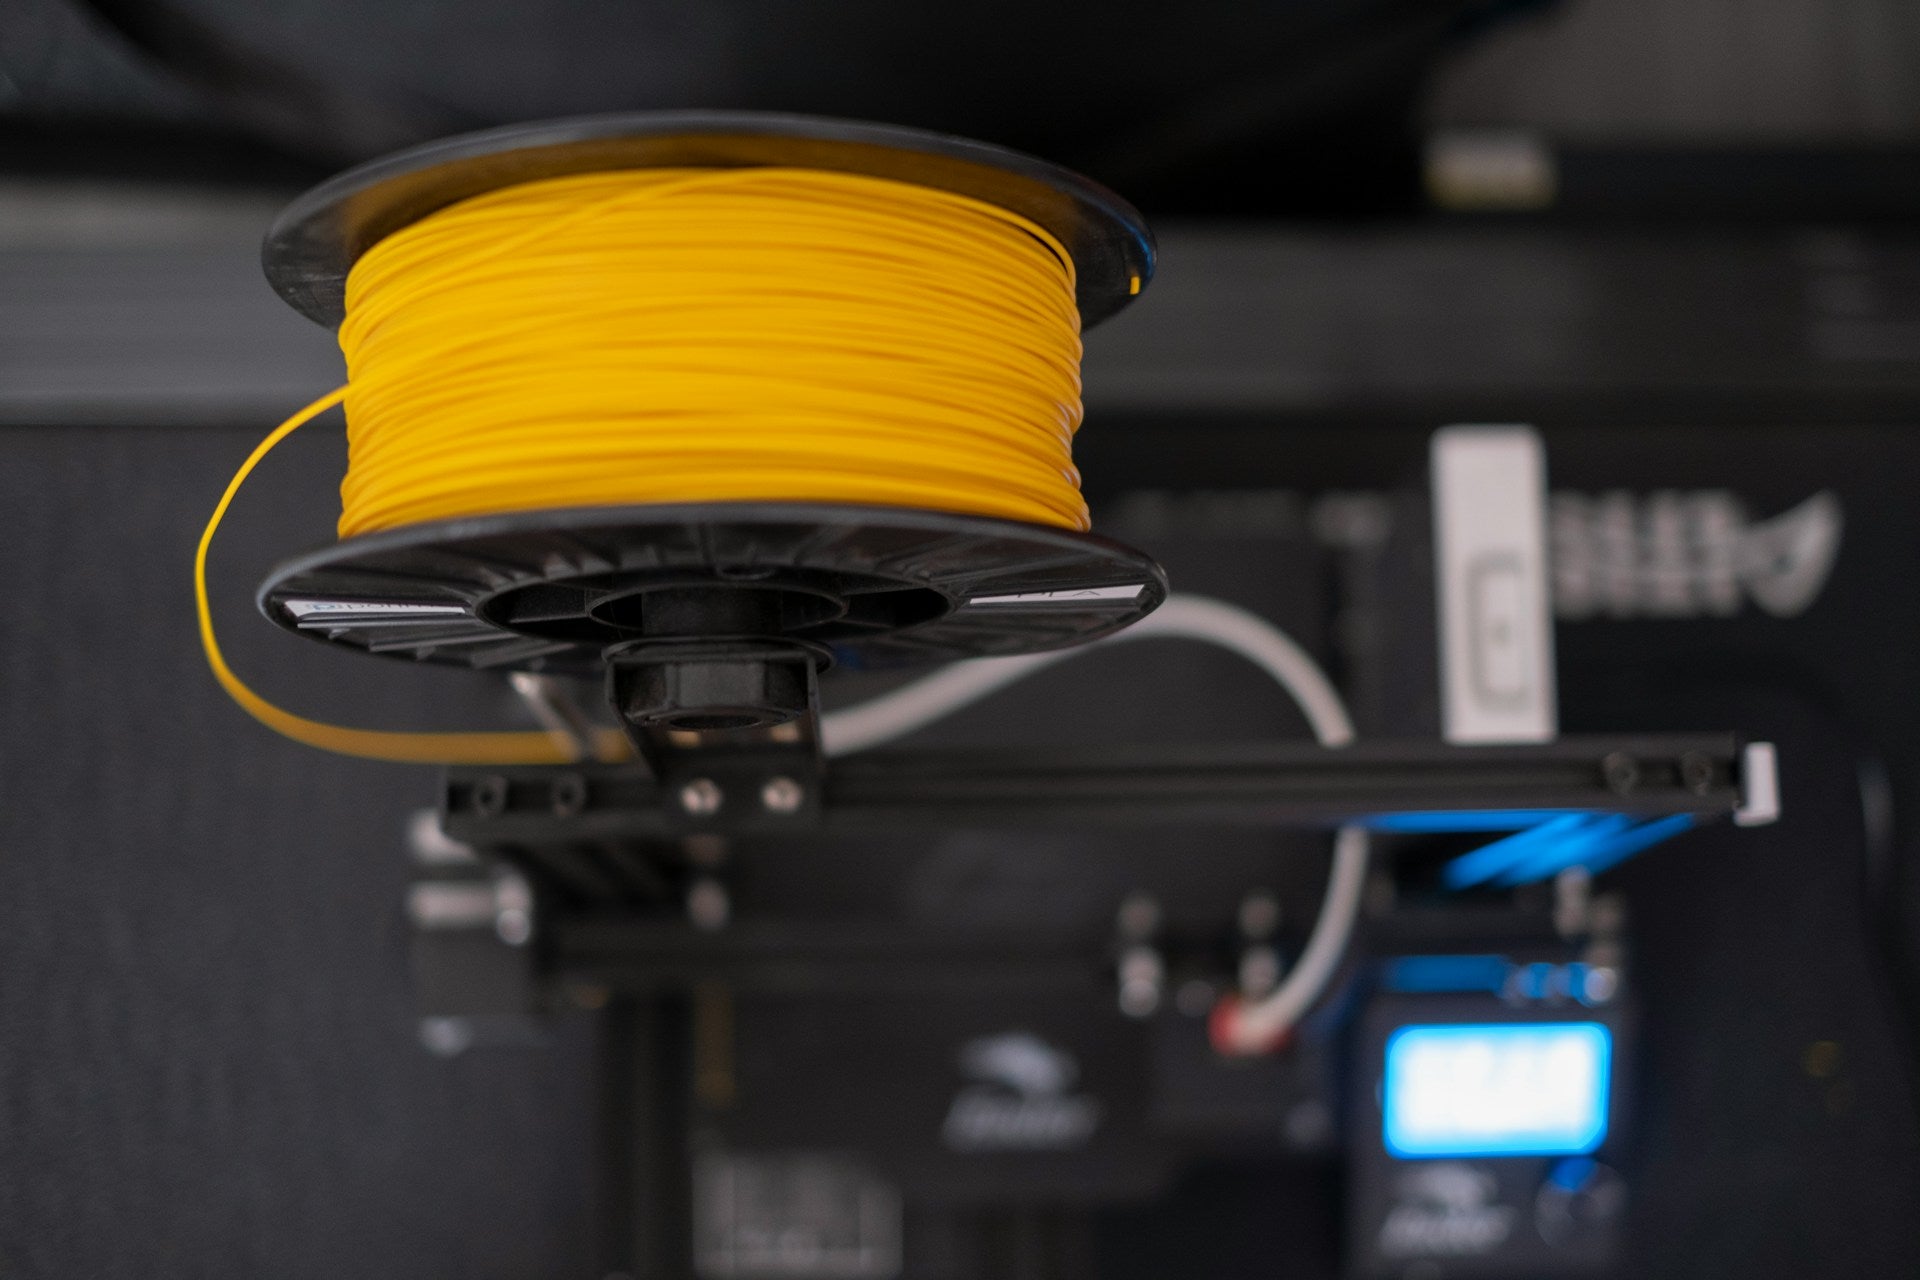 Can any filament be used in with any 3D printer?